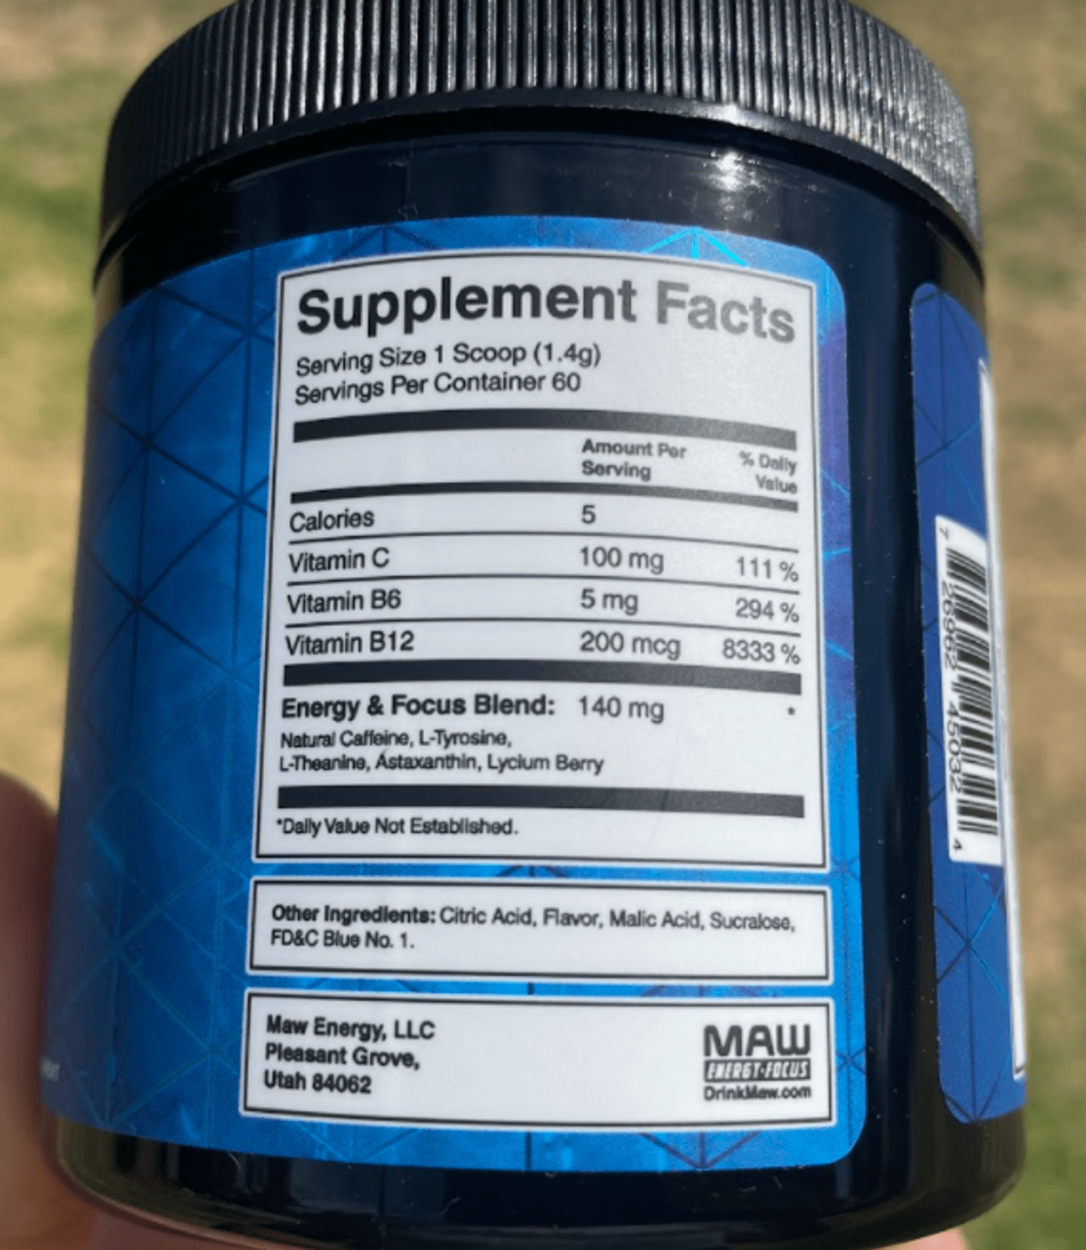 Supplement facts of Maw Energy.